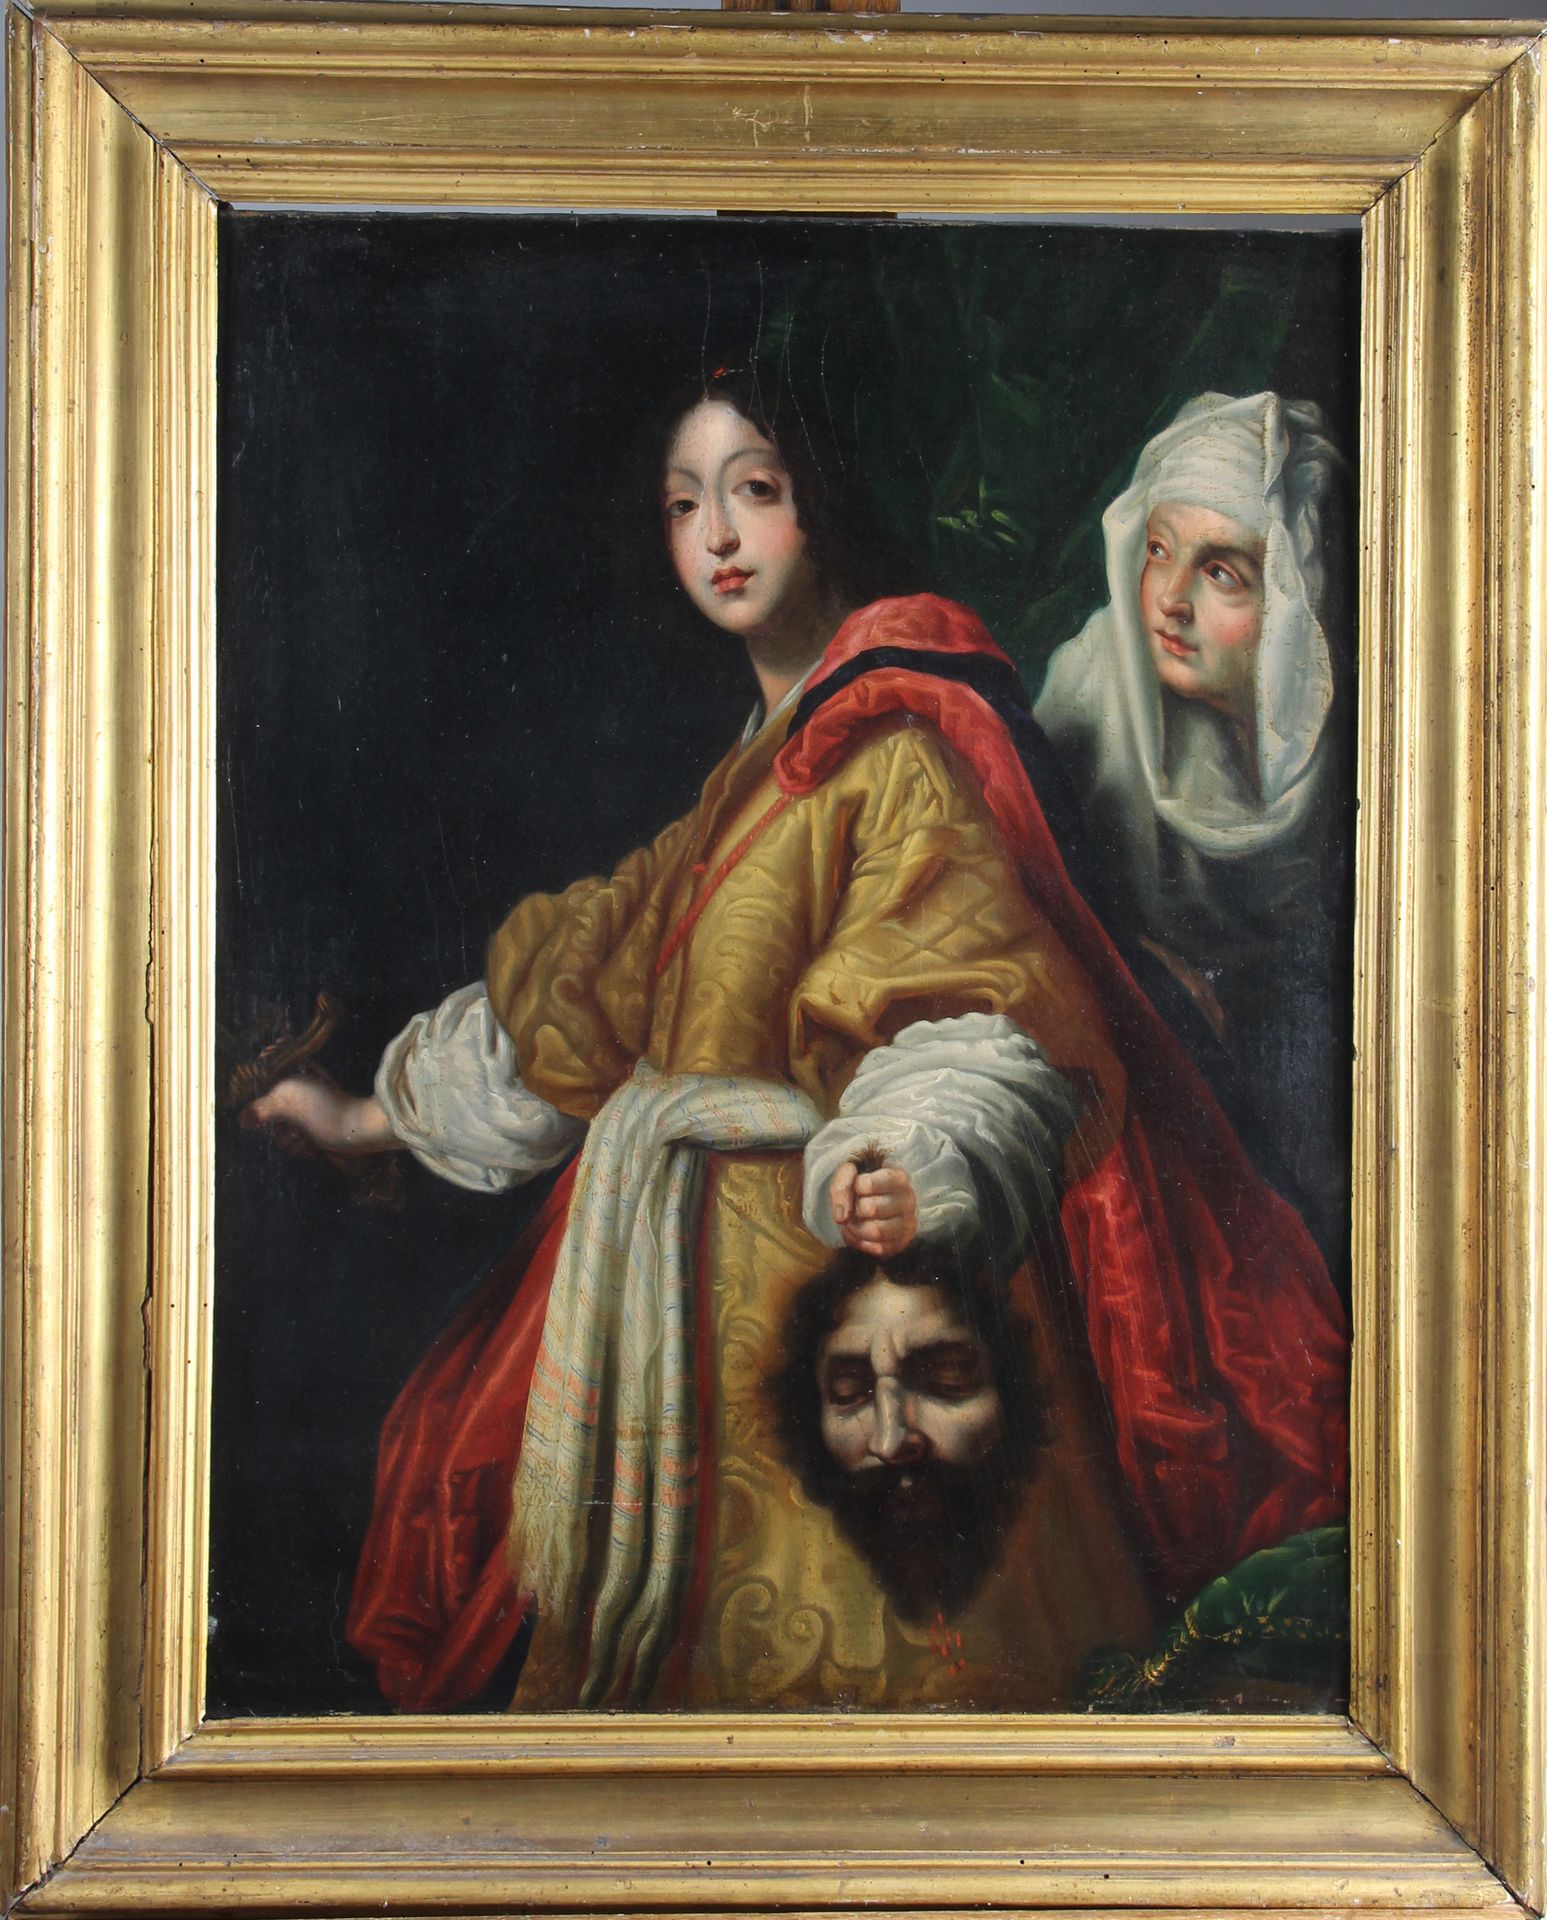 Null 19th CENTURY ITALIAN PATIENT

"Judith and Holofernes" 

Oil on canvas.

Dim&hellip;